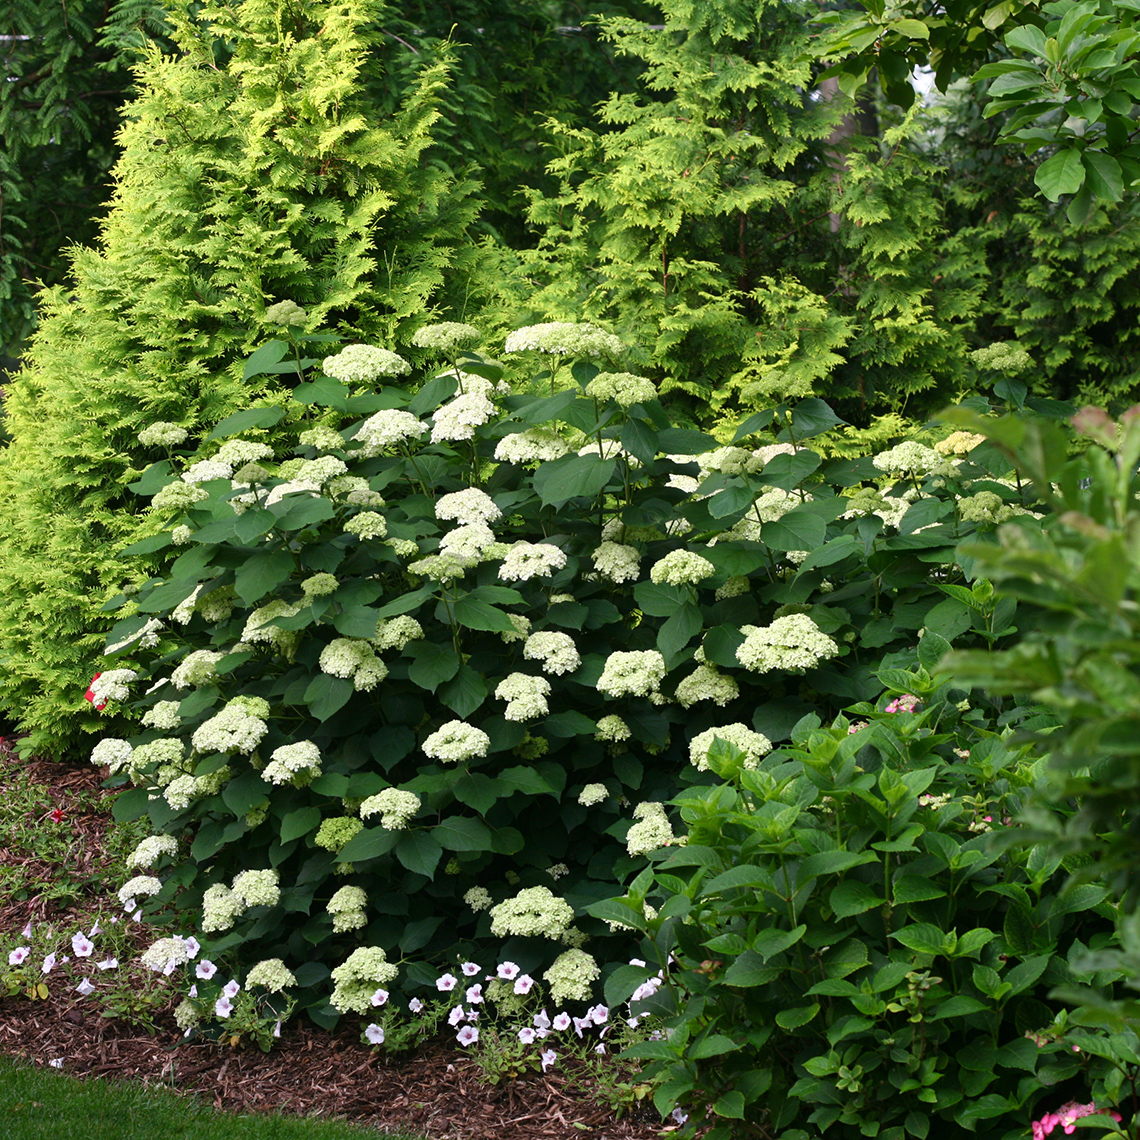 Lime Rickey hydrangea in bloom in the landscape showing abundant blooms and strong stems